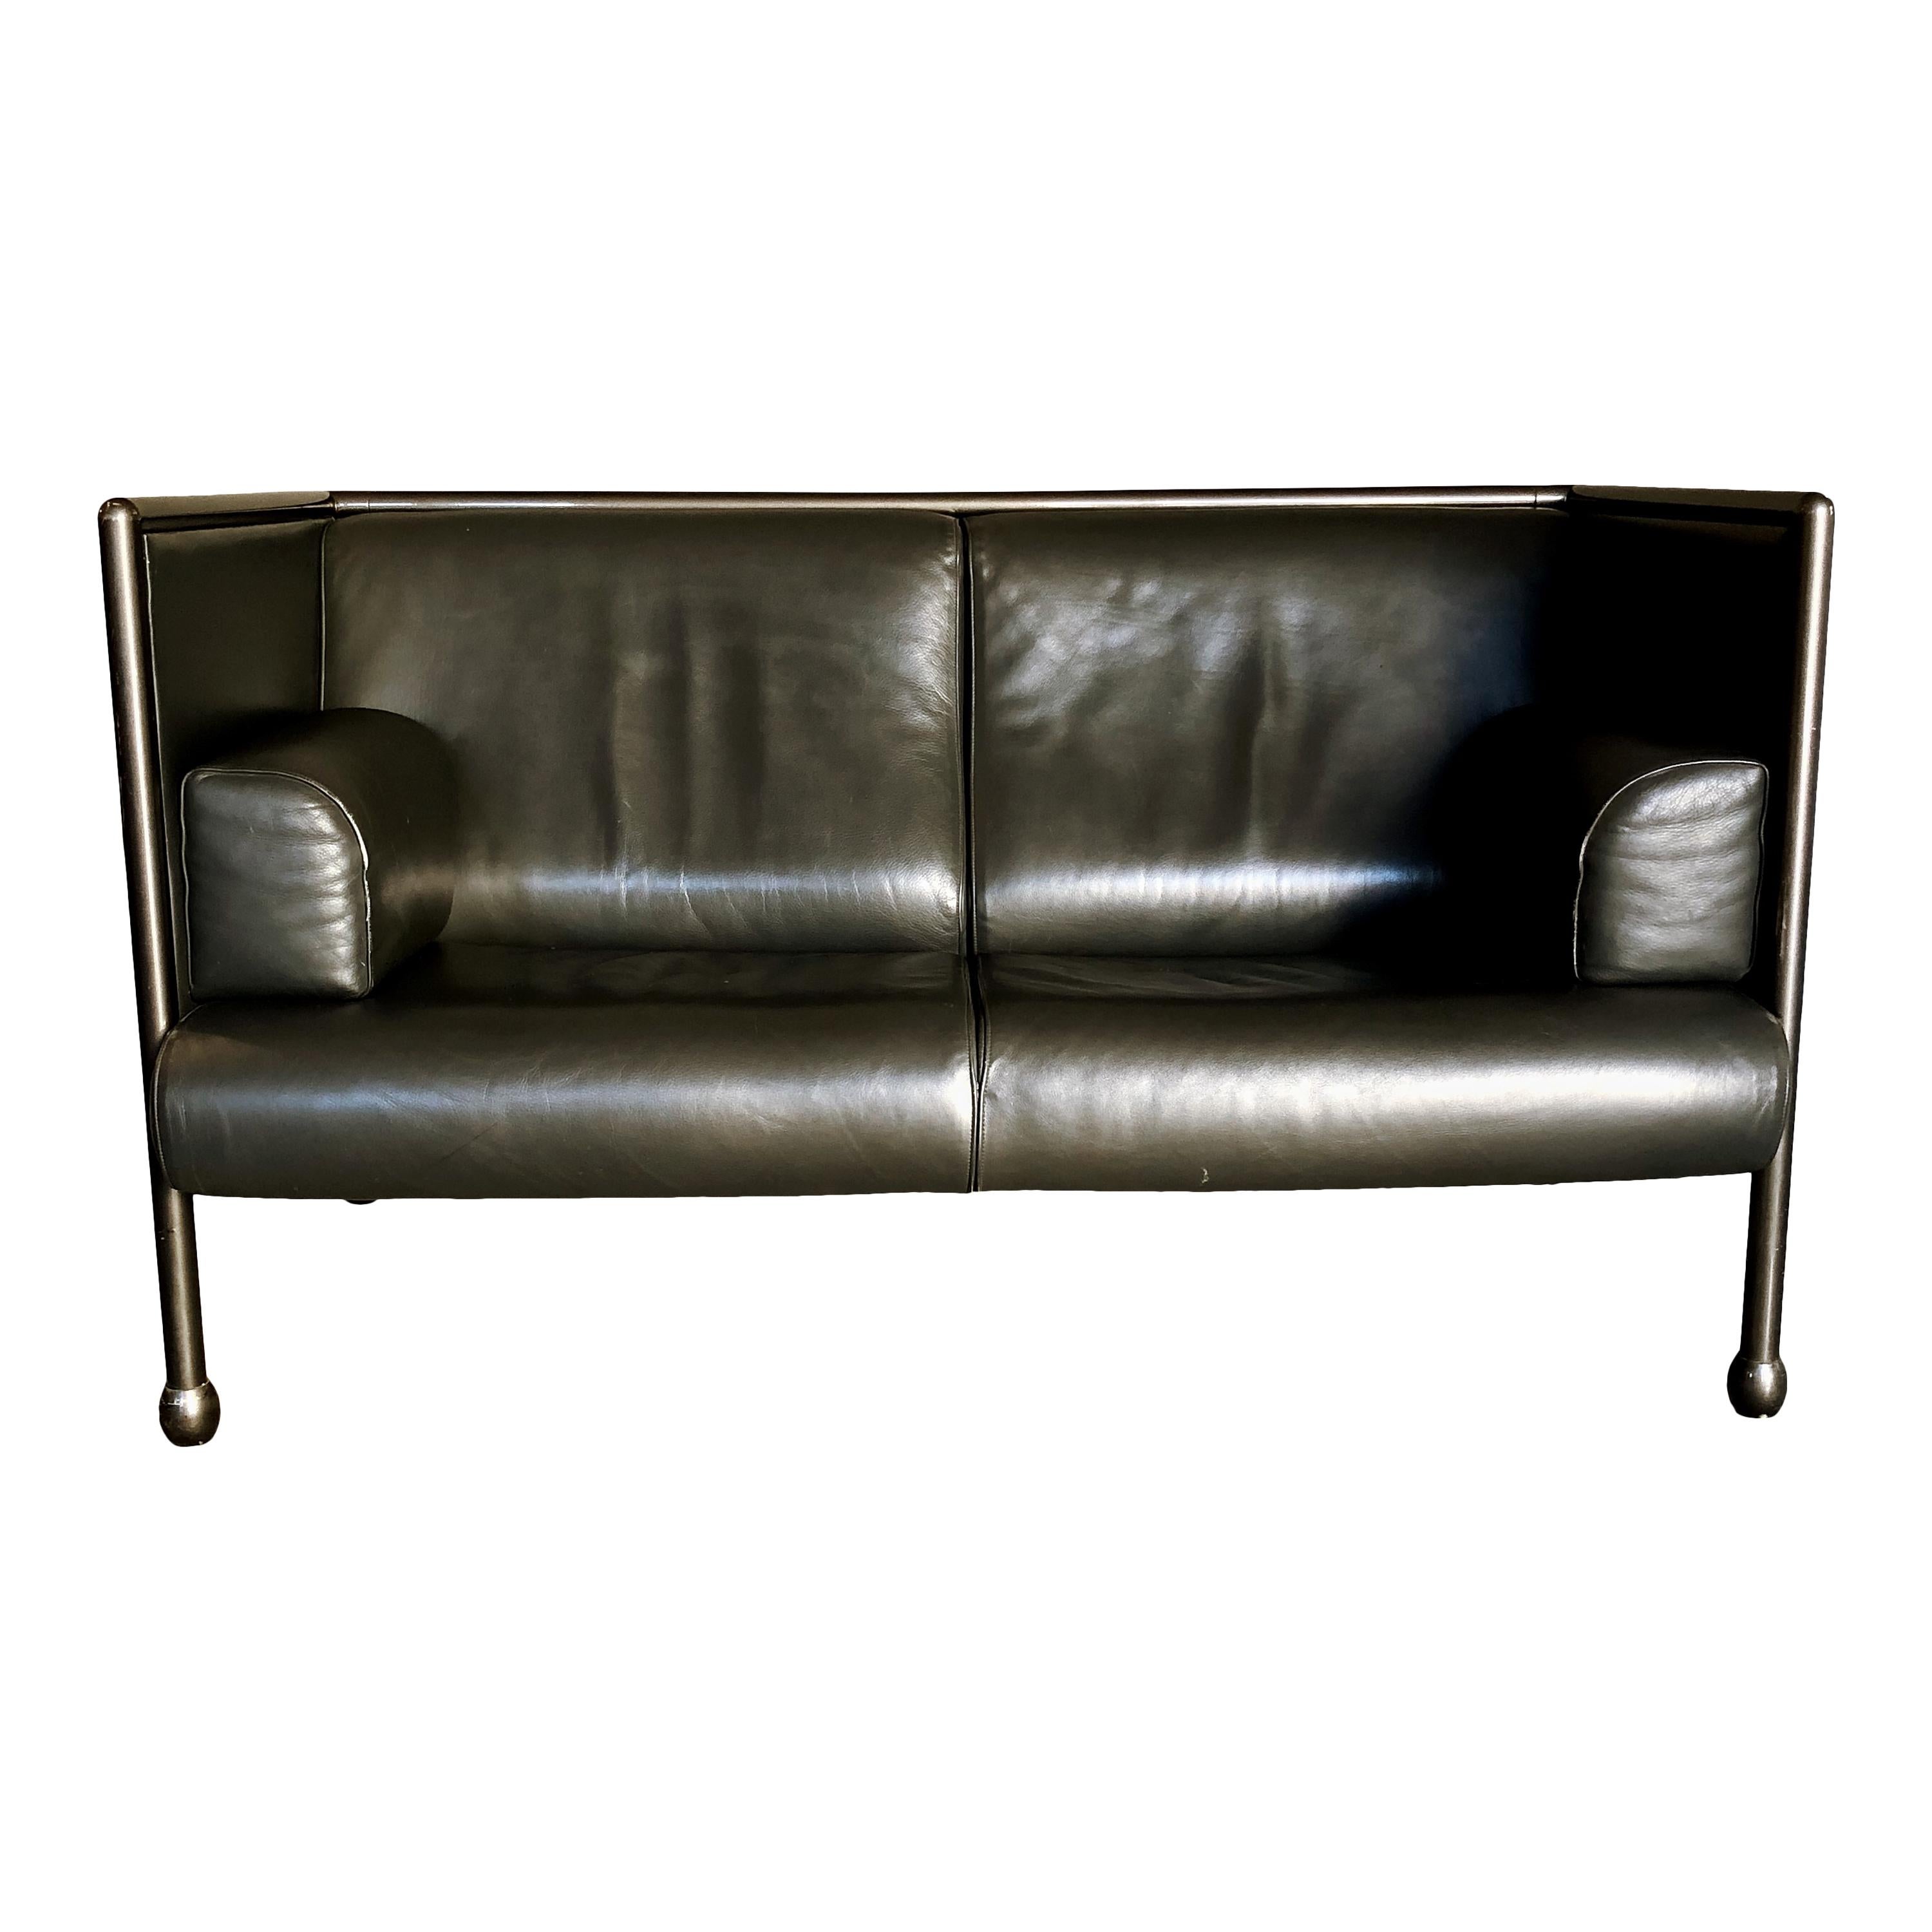 Late 20th Century Ettore Sottsass Postmodern Iron and Black Leather Danube Sofa for Cassina, 1992 For Sale